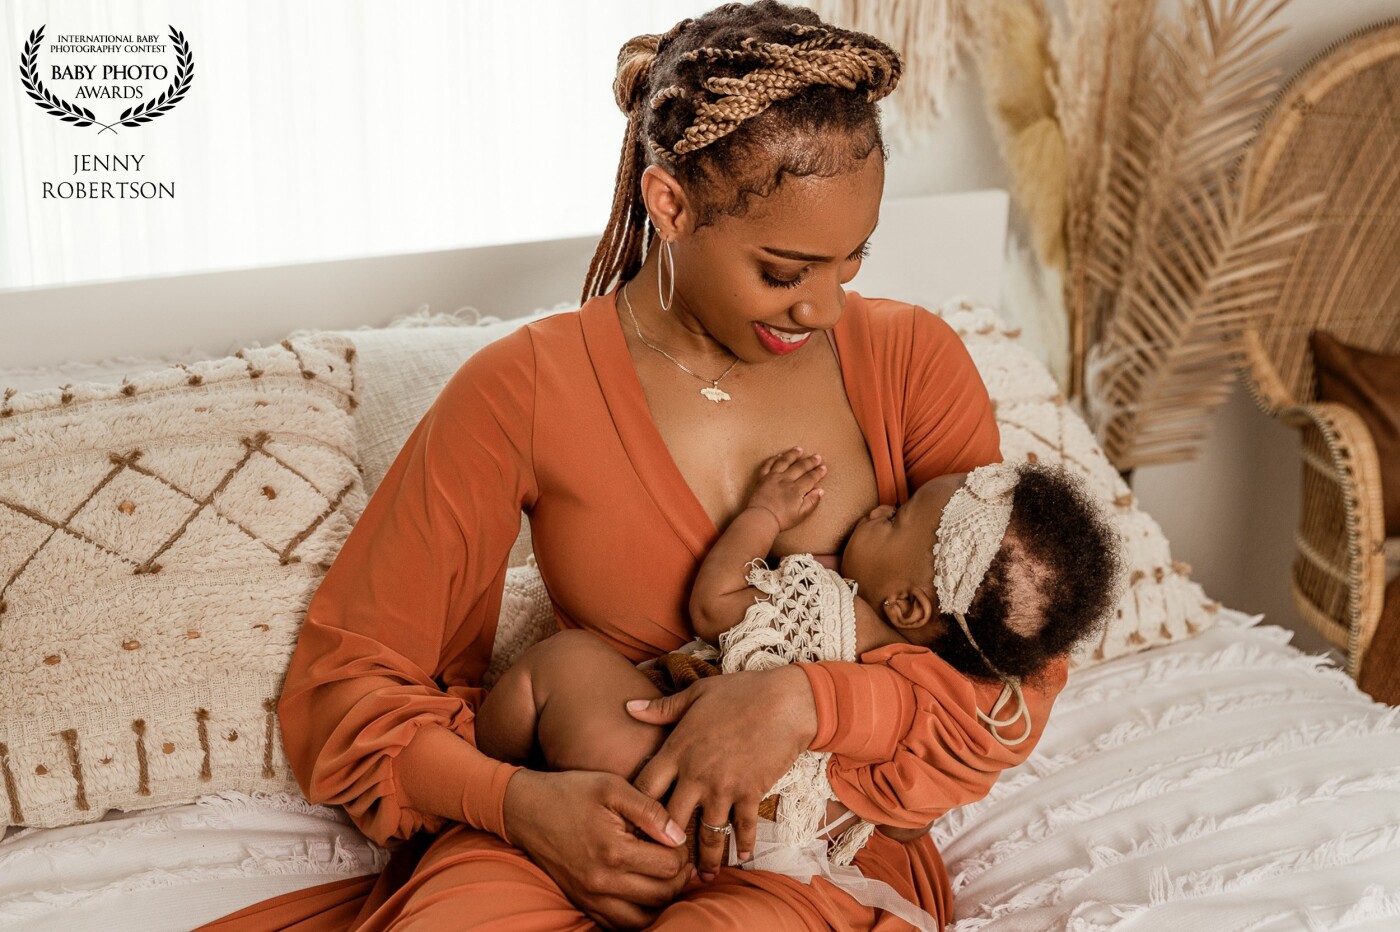 This photo was taken when baby got fussy during our photoshoot. We just kept on shooting to capture that connection between mother and baby while nursing. I just love her little hand over mammas heart.